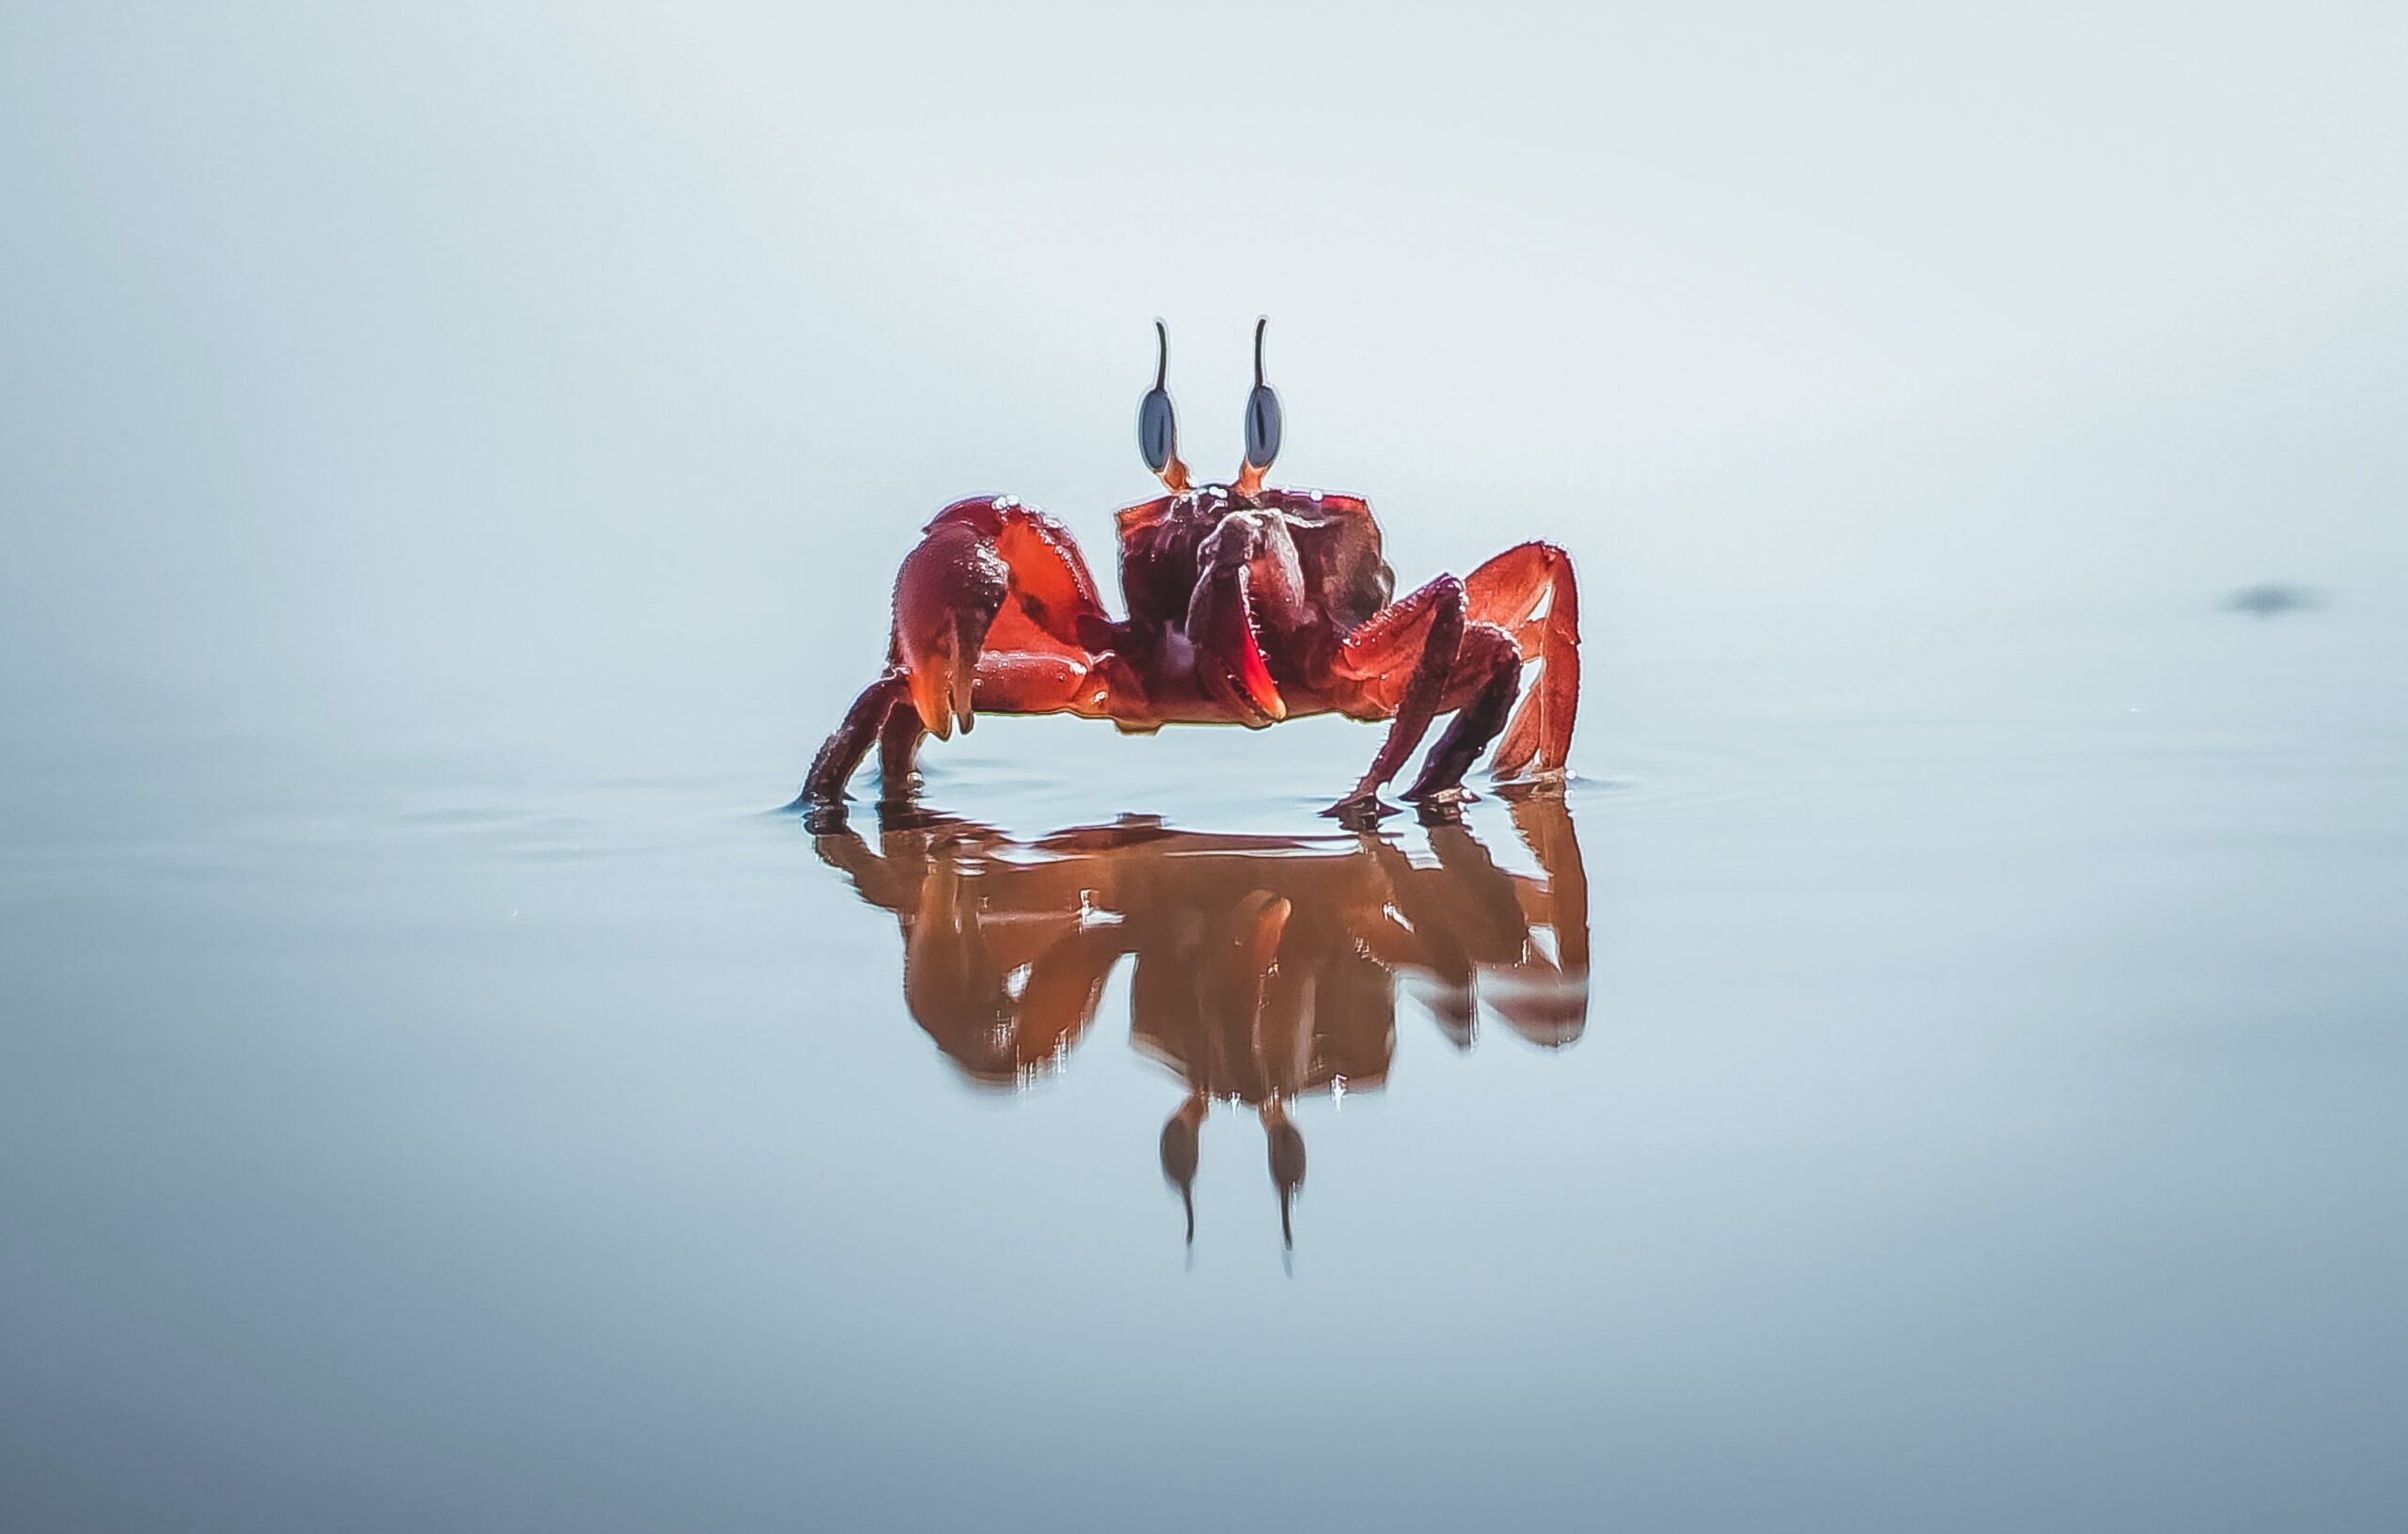 Red crab on water.